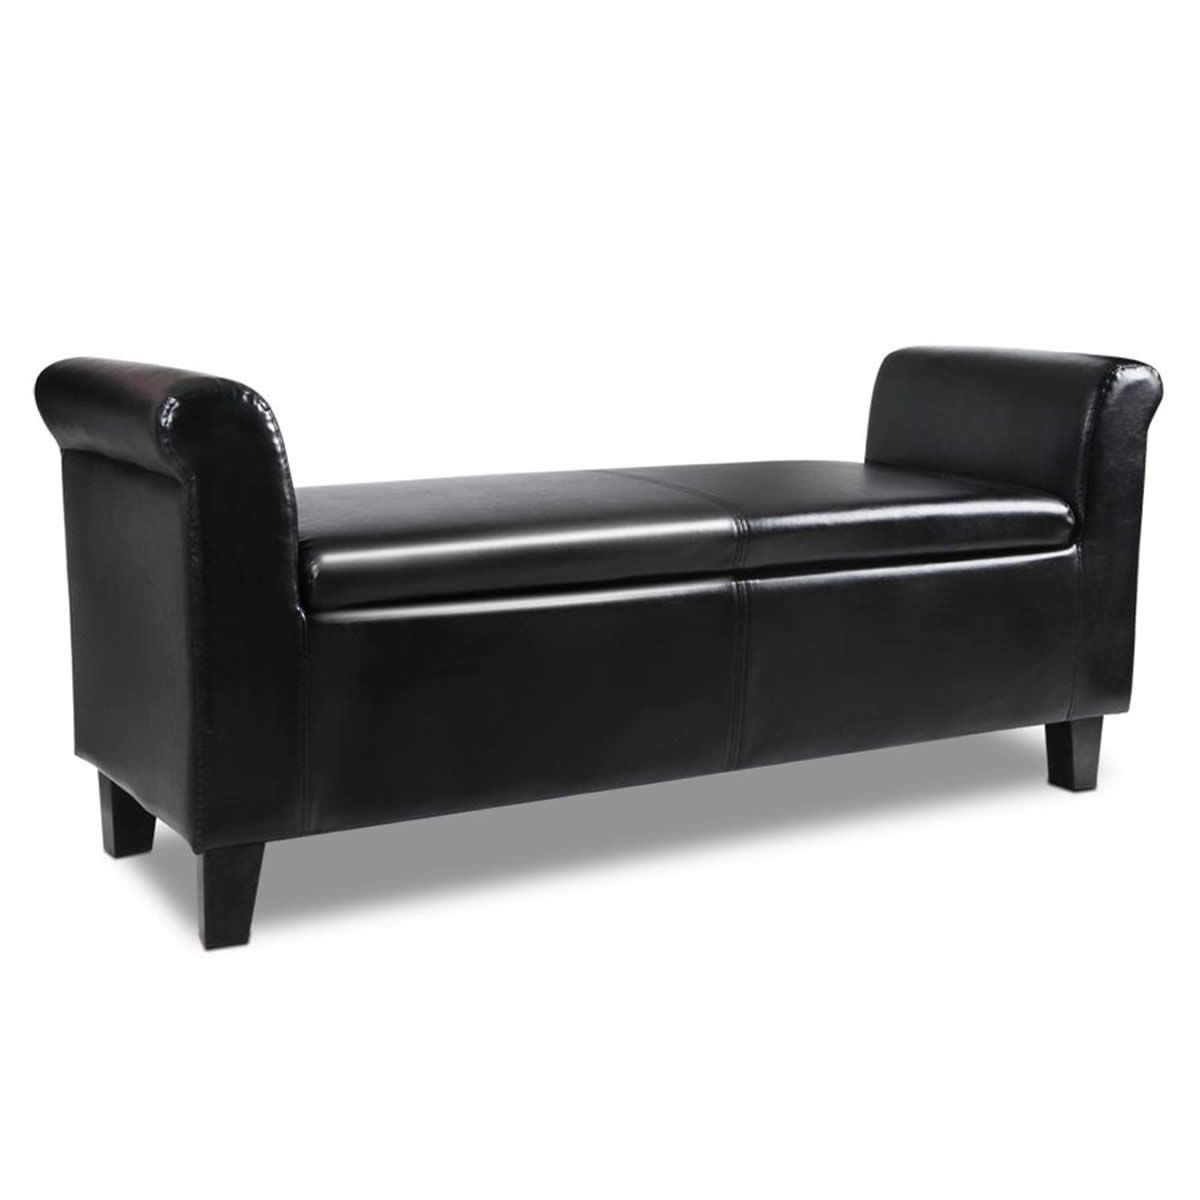 PU Leather Storage Ottoman Bench with Armrests - Black